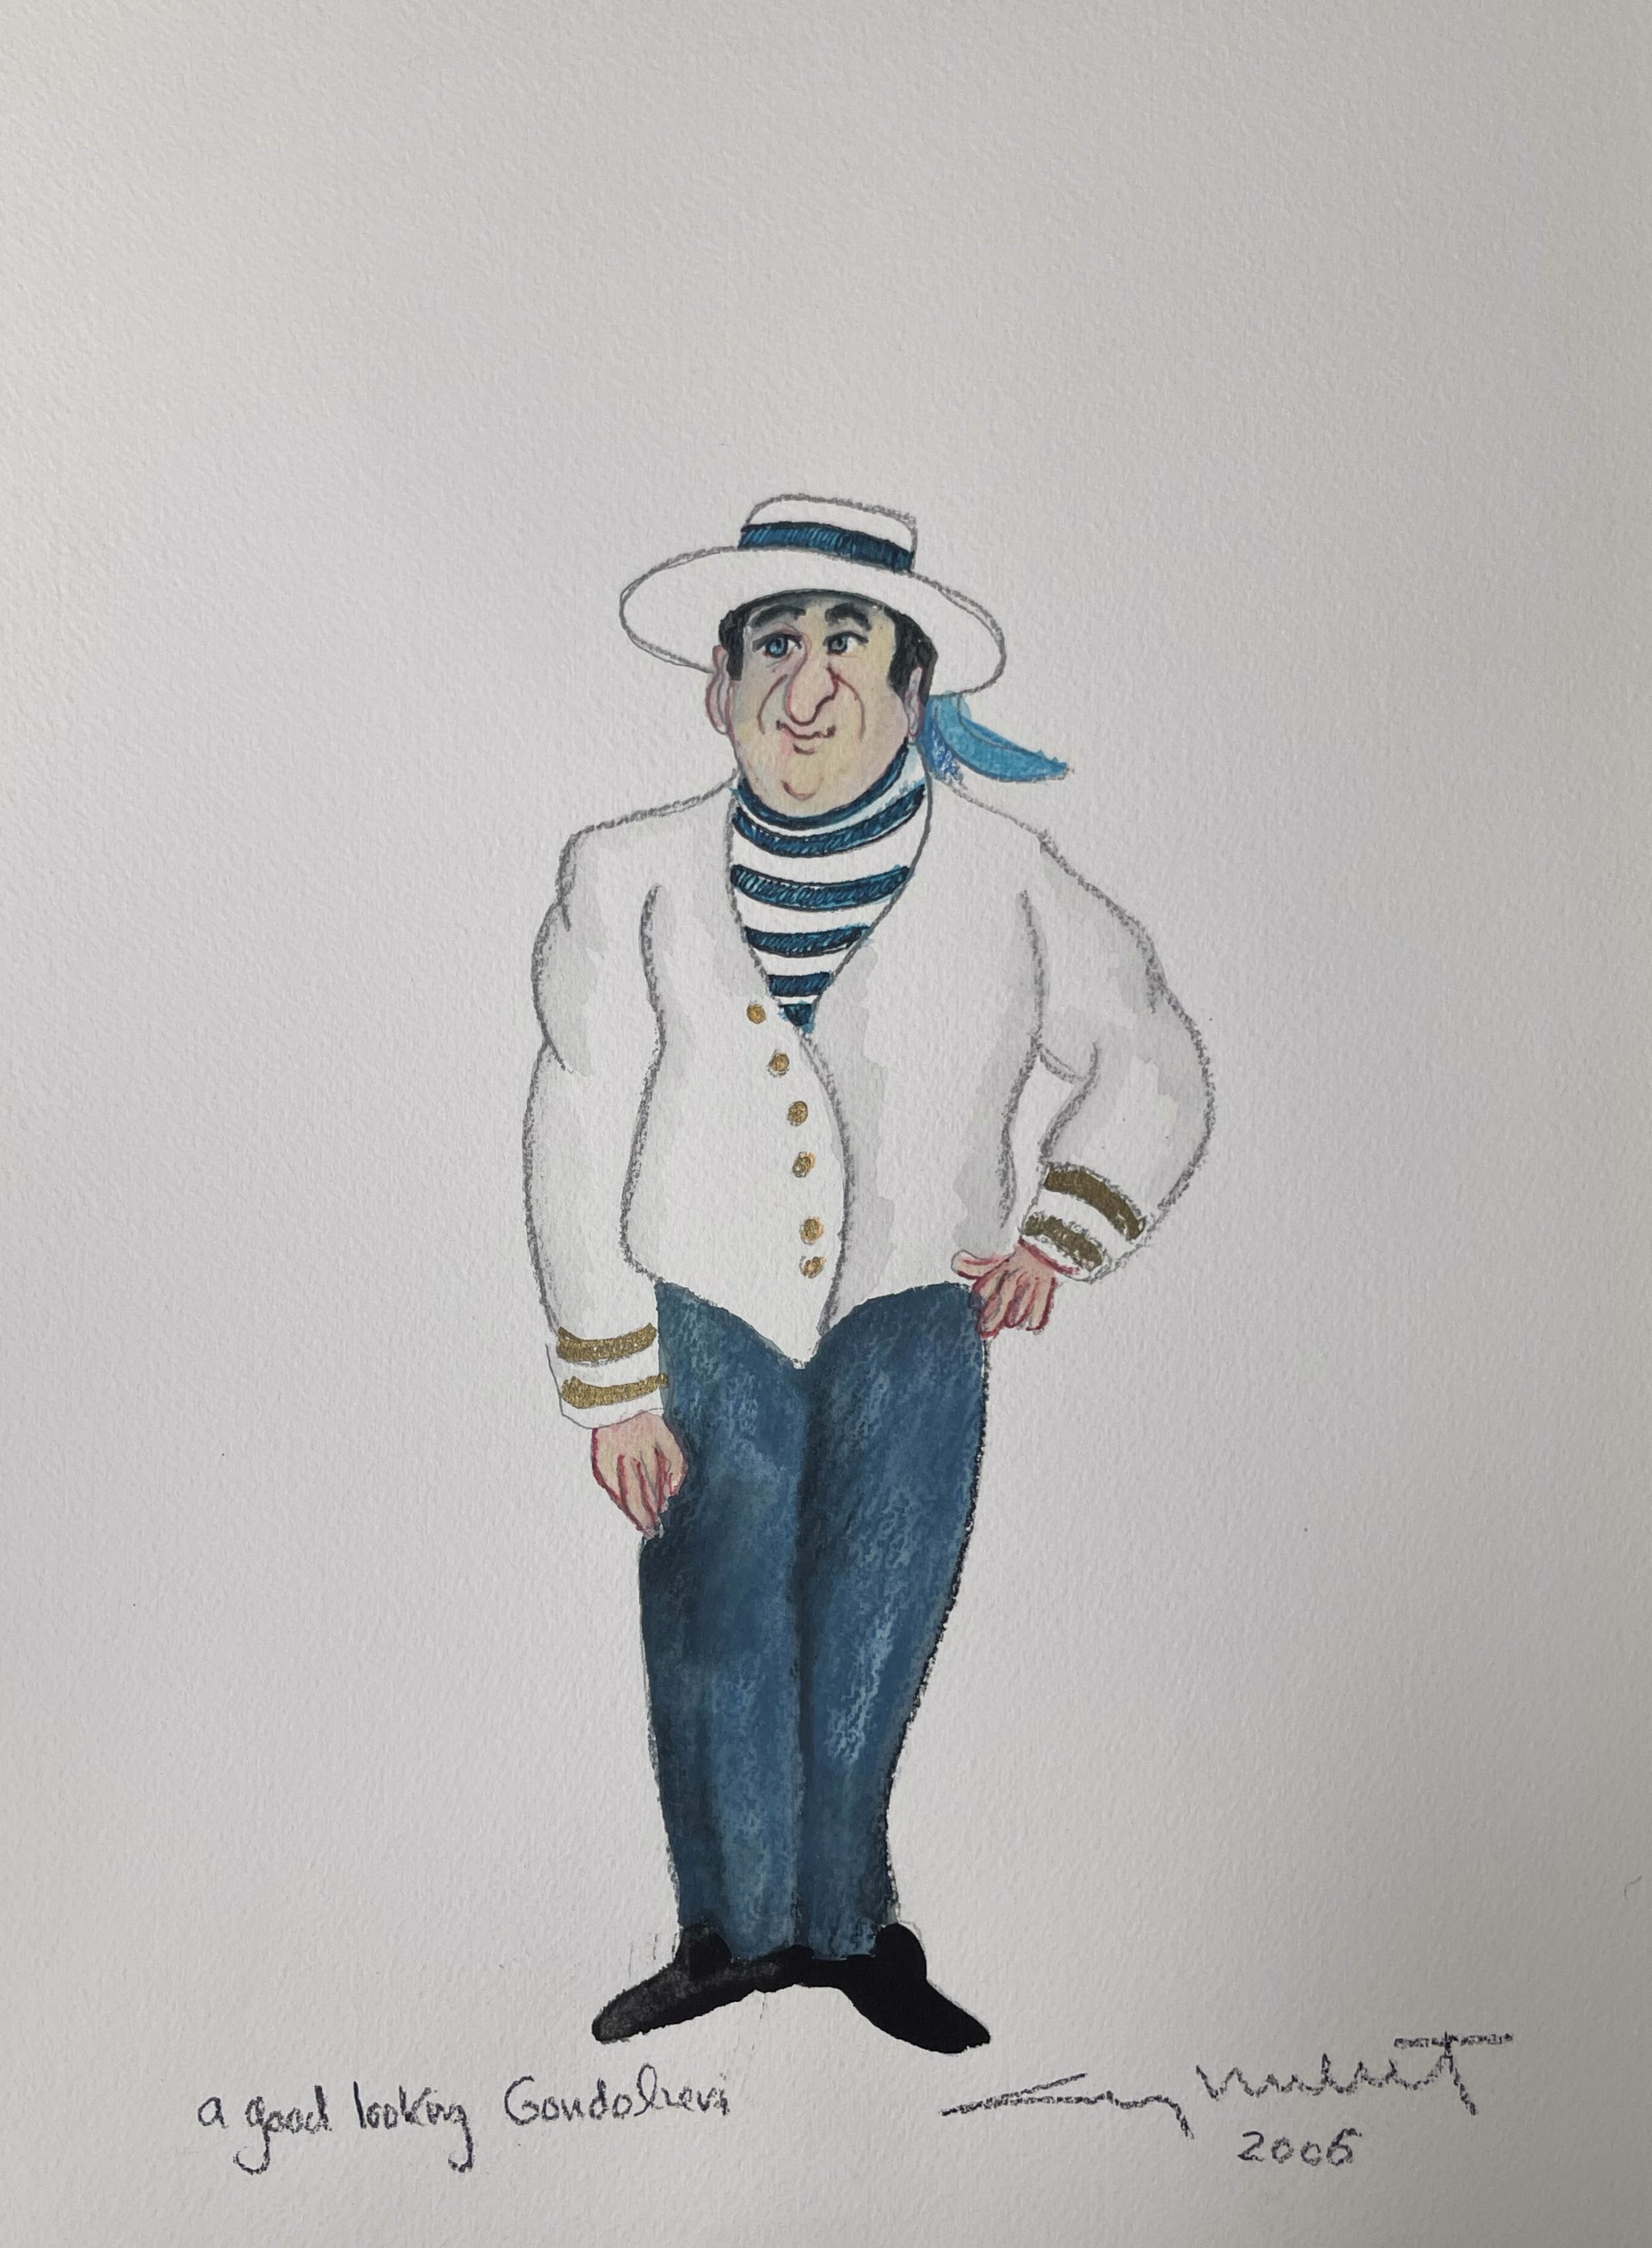 A Good Looking Gondolier by Guy Buffet